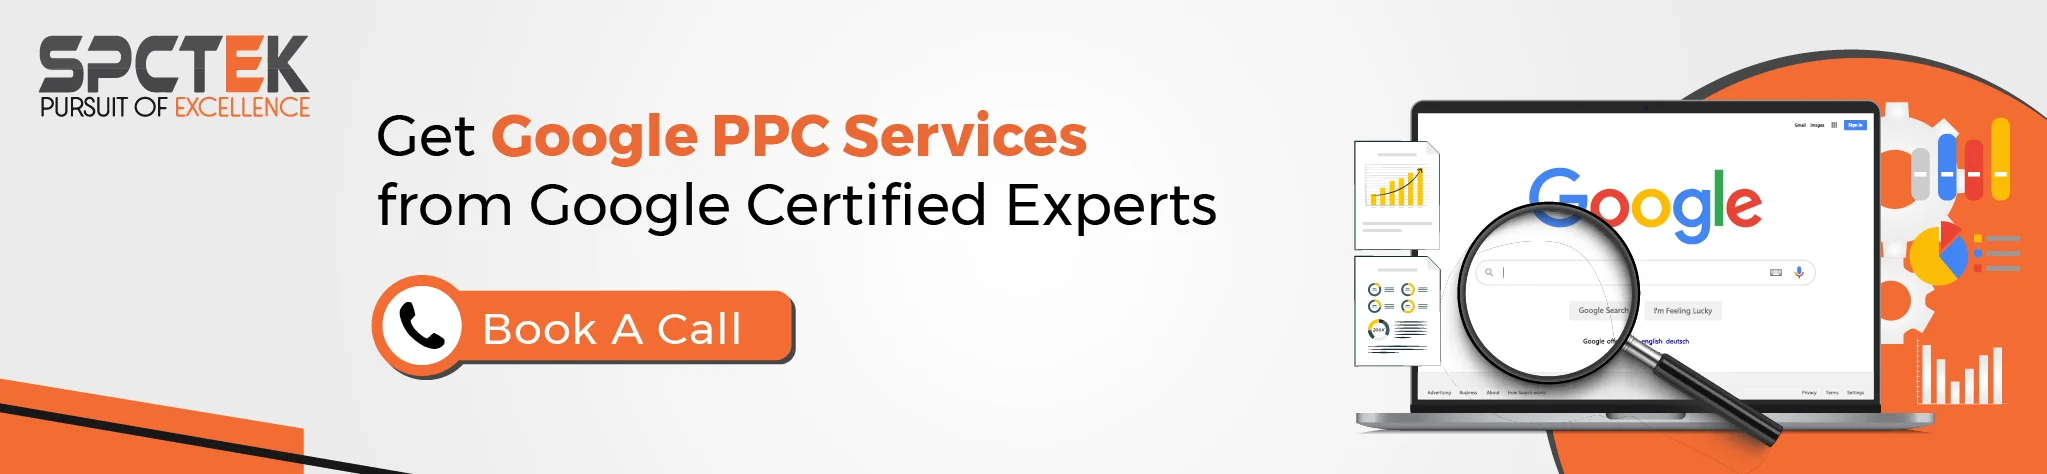 Google ppc service from certified experts